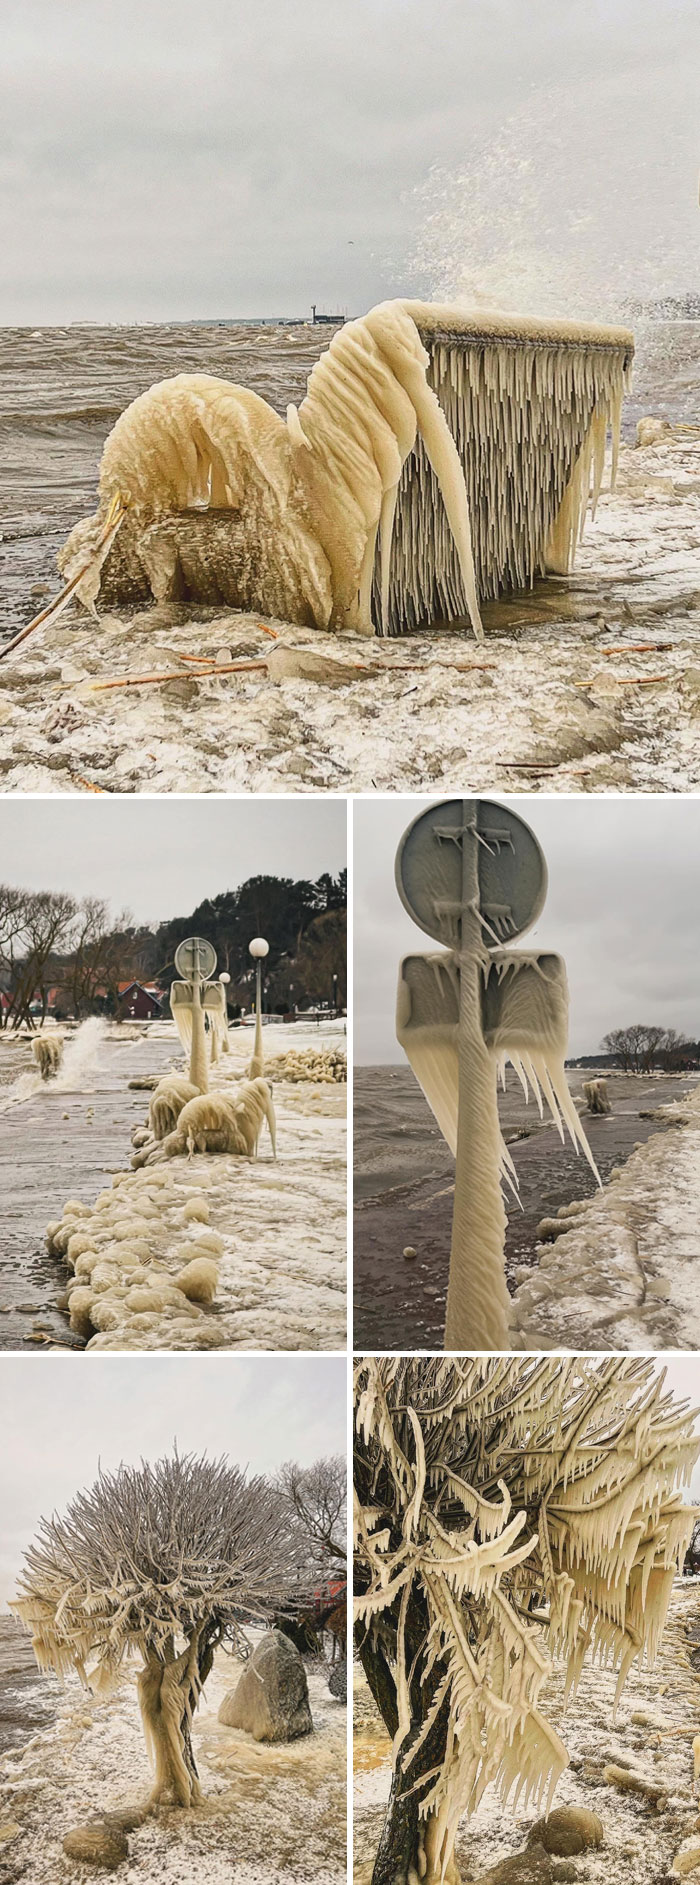 Freezing Temperatures And Strong Winds Have Created Breathtaking Formations Of Ice In Lithuania’s Resort Town Nida